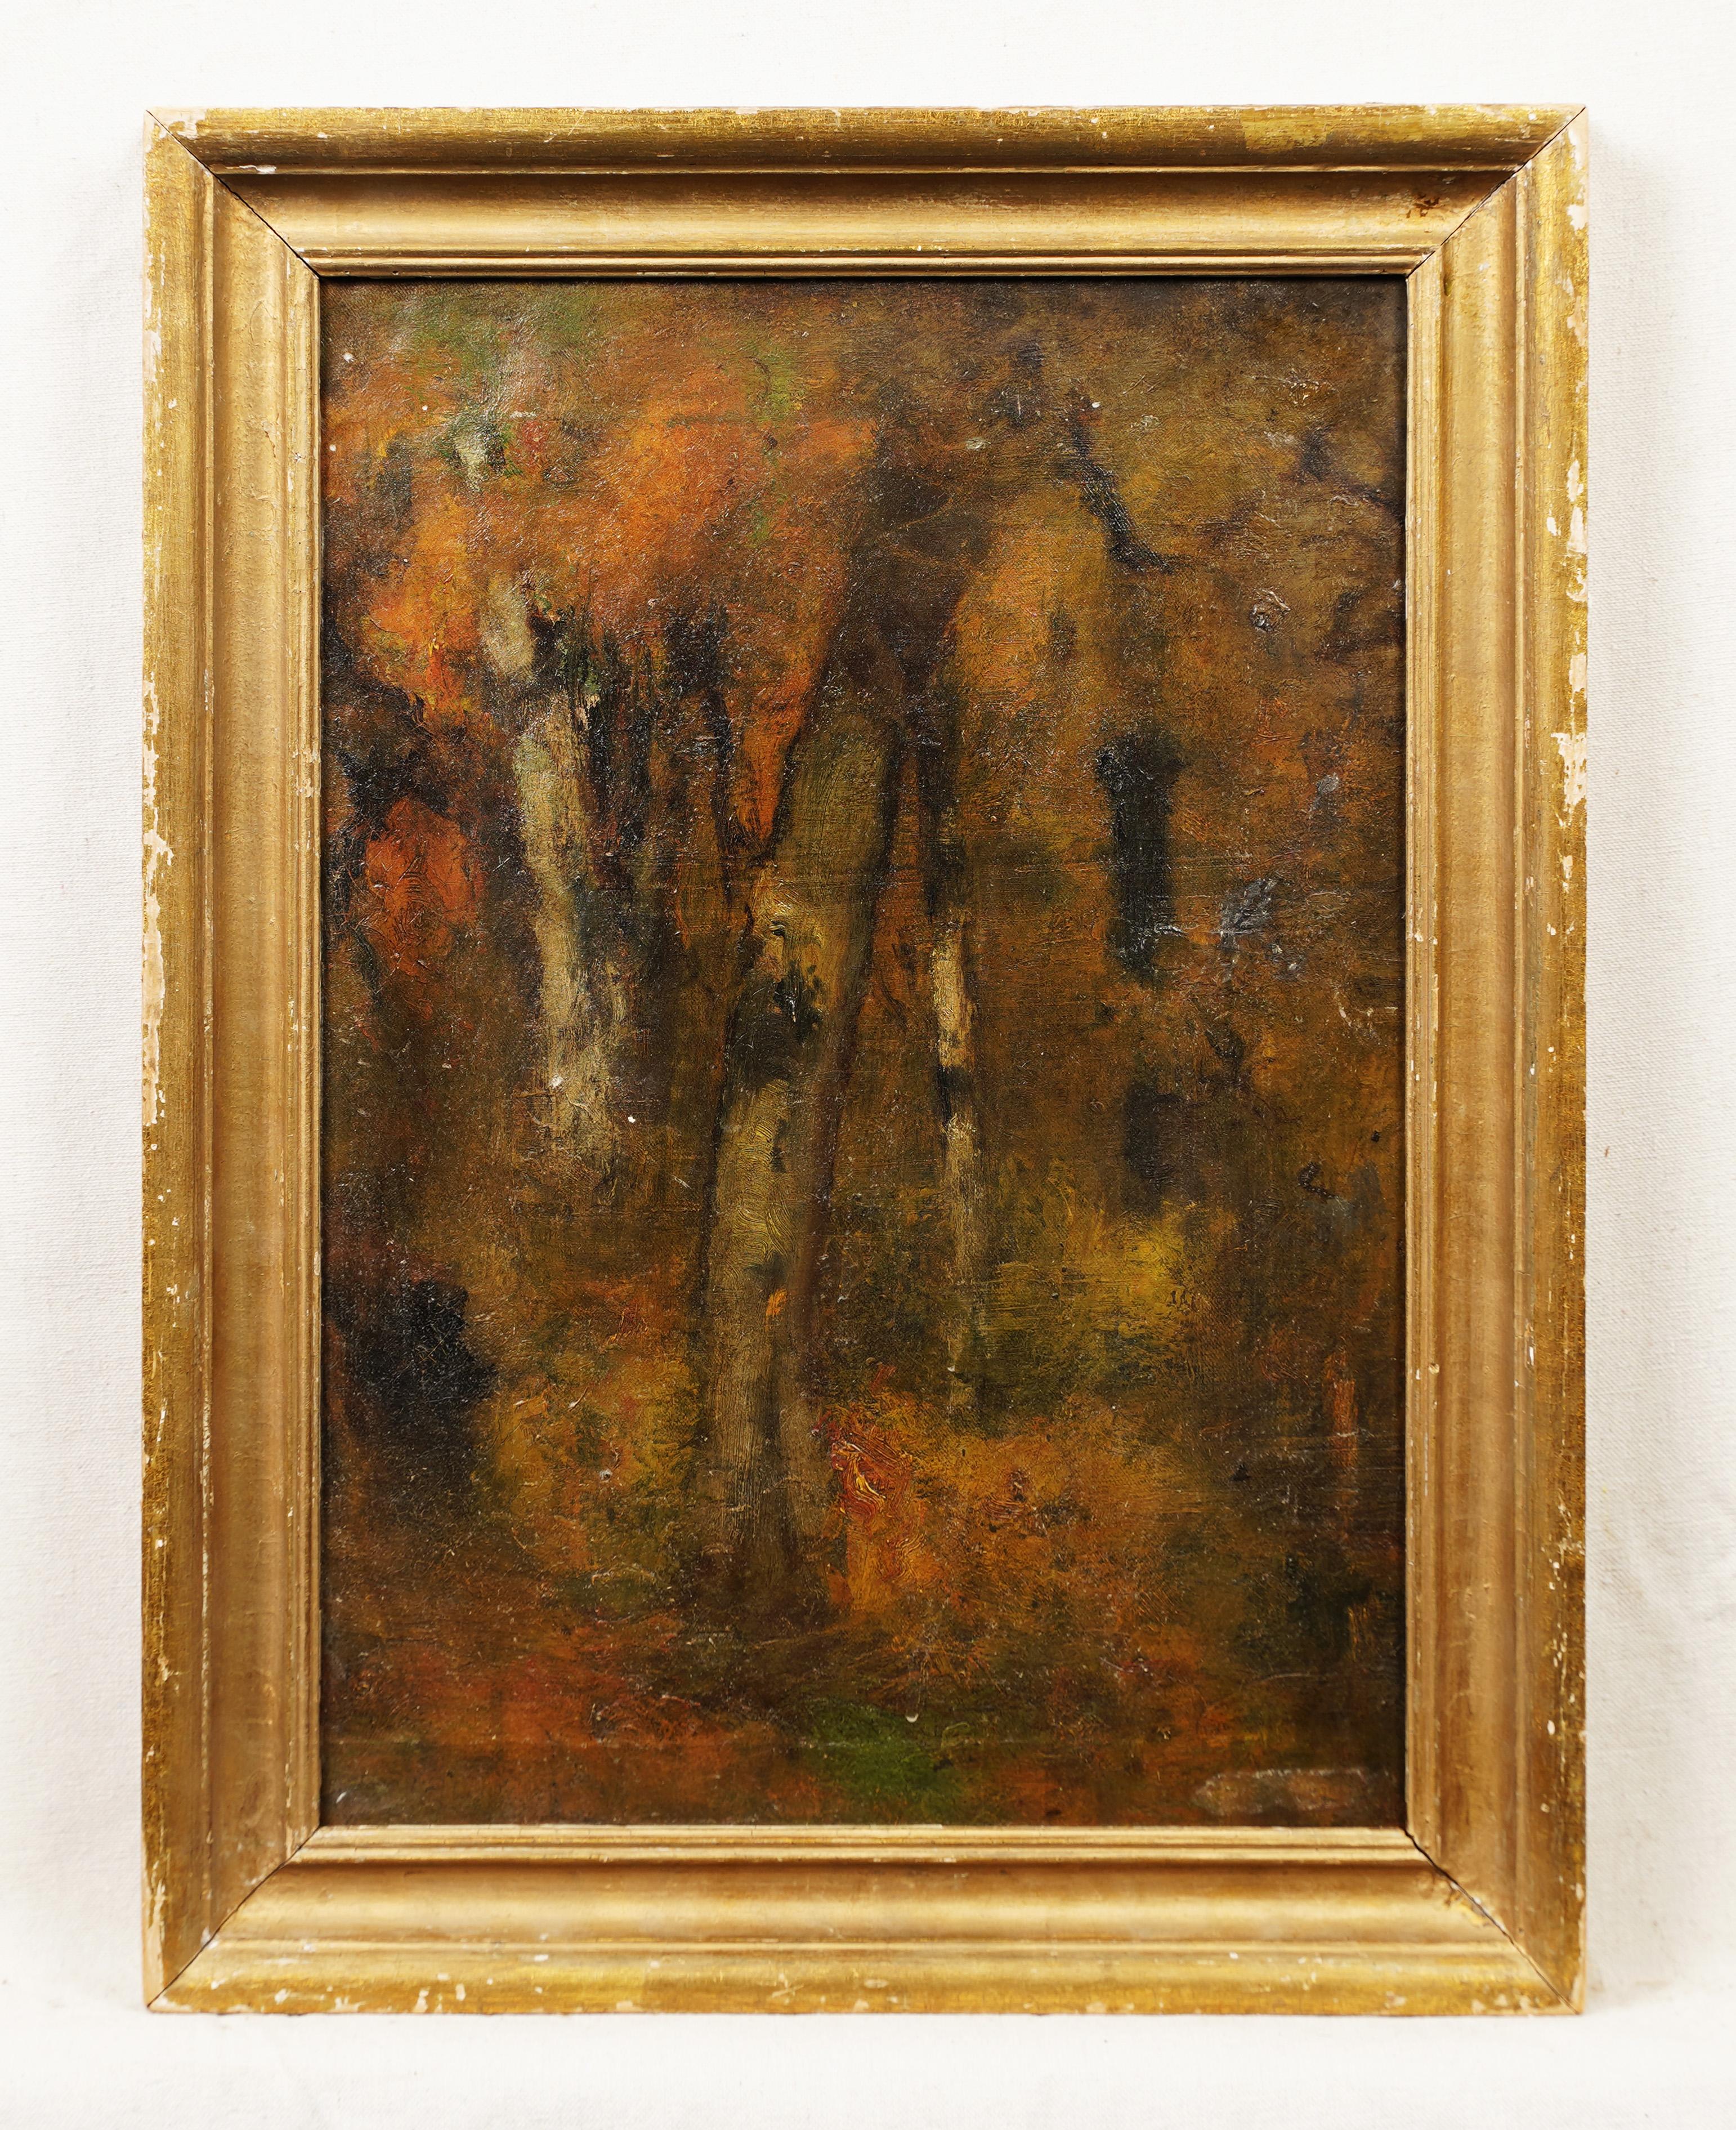 Antique American impressionist fall forest oil painting.  Oil on canvasboard.   Finely painted and housed in a period giltwood frame.